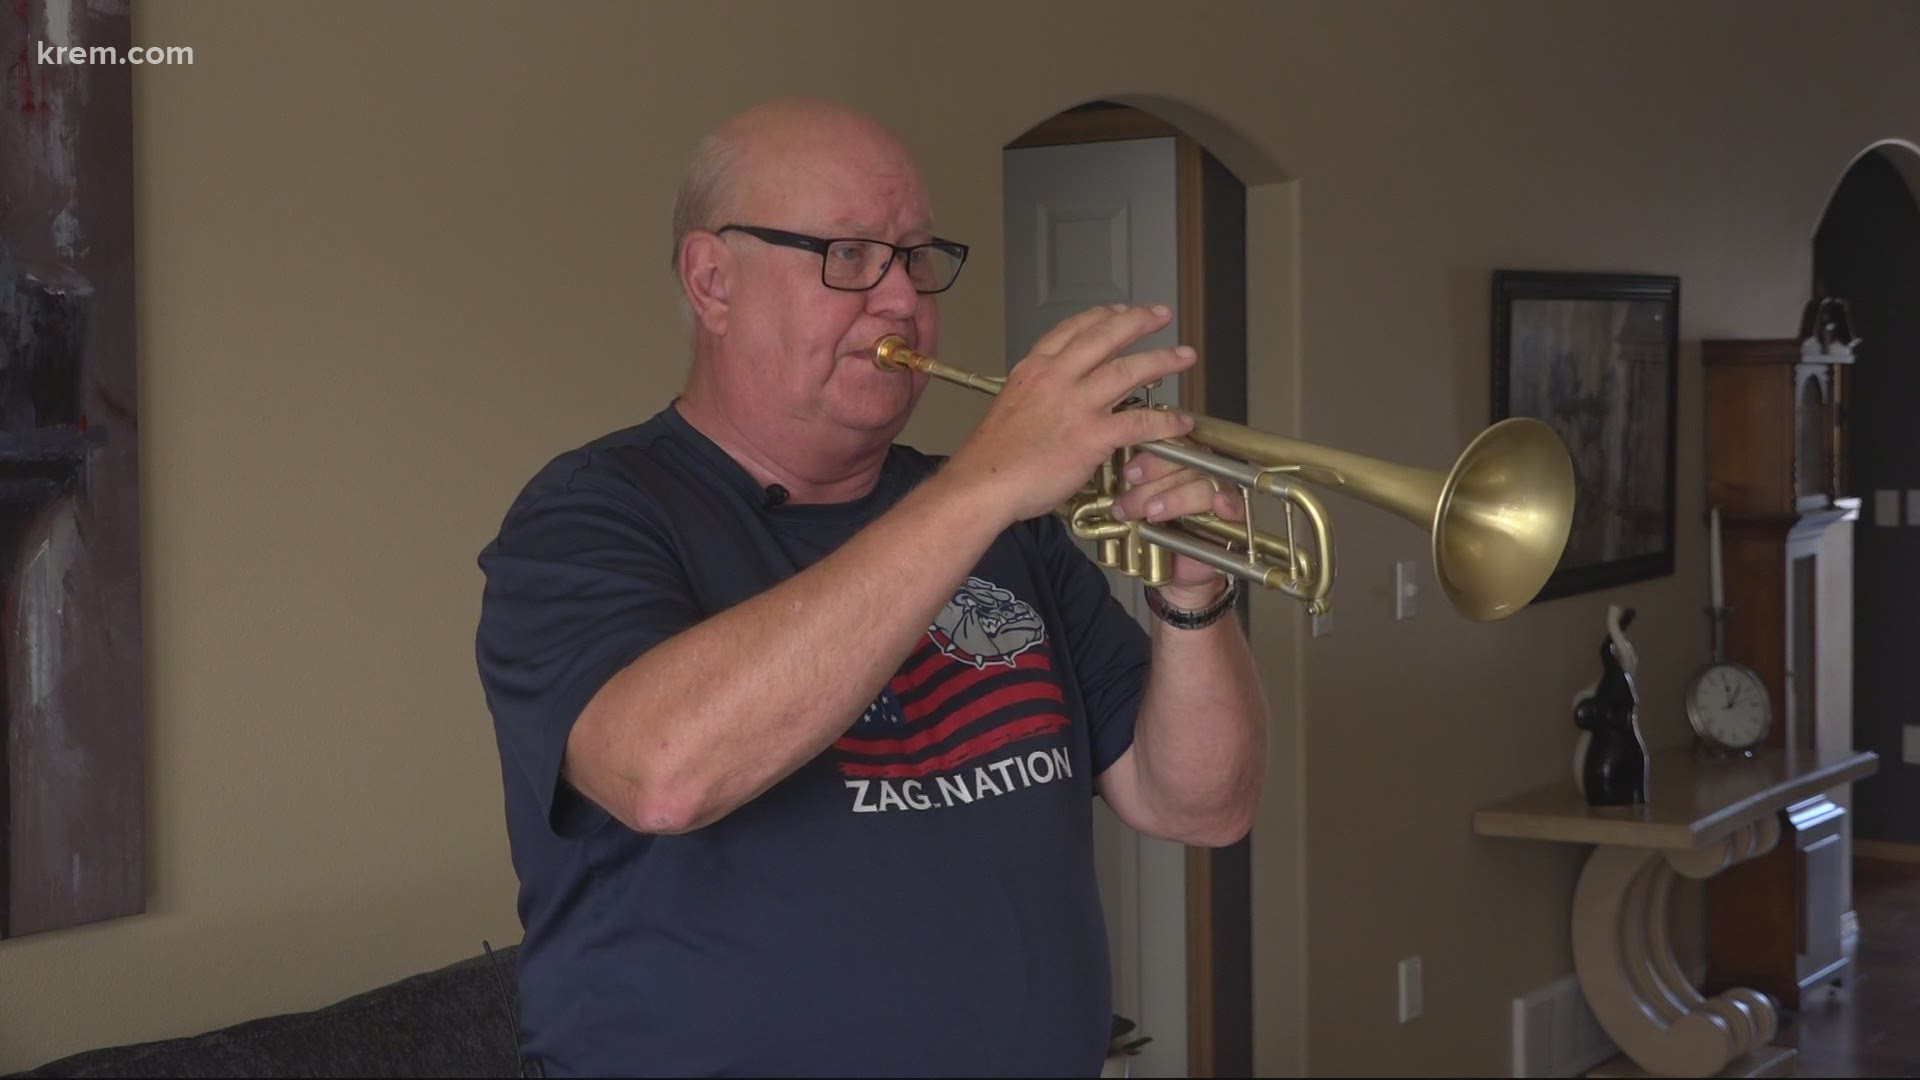 Larry Jess, the Principal Trumpet player in the Spokane Symphony, played 'Taps' at 3 p.m. as part of Taps Across America.